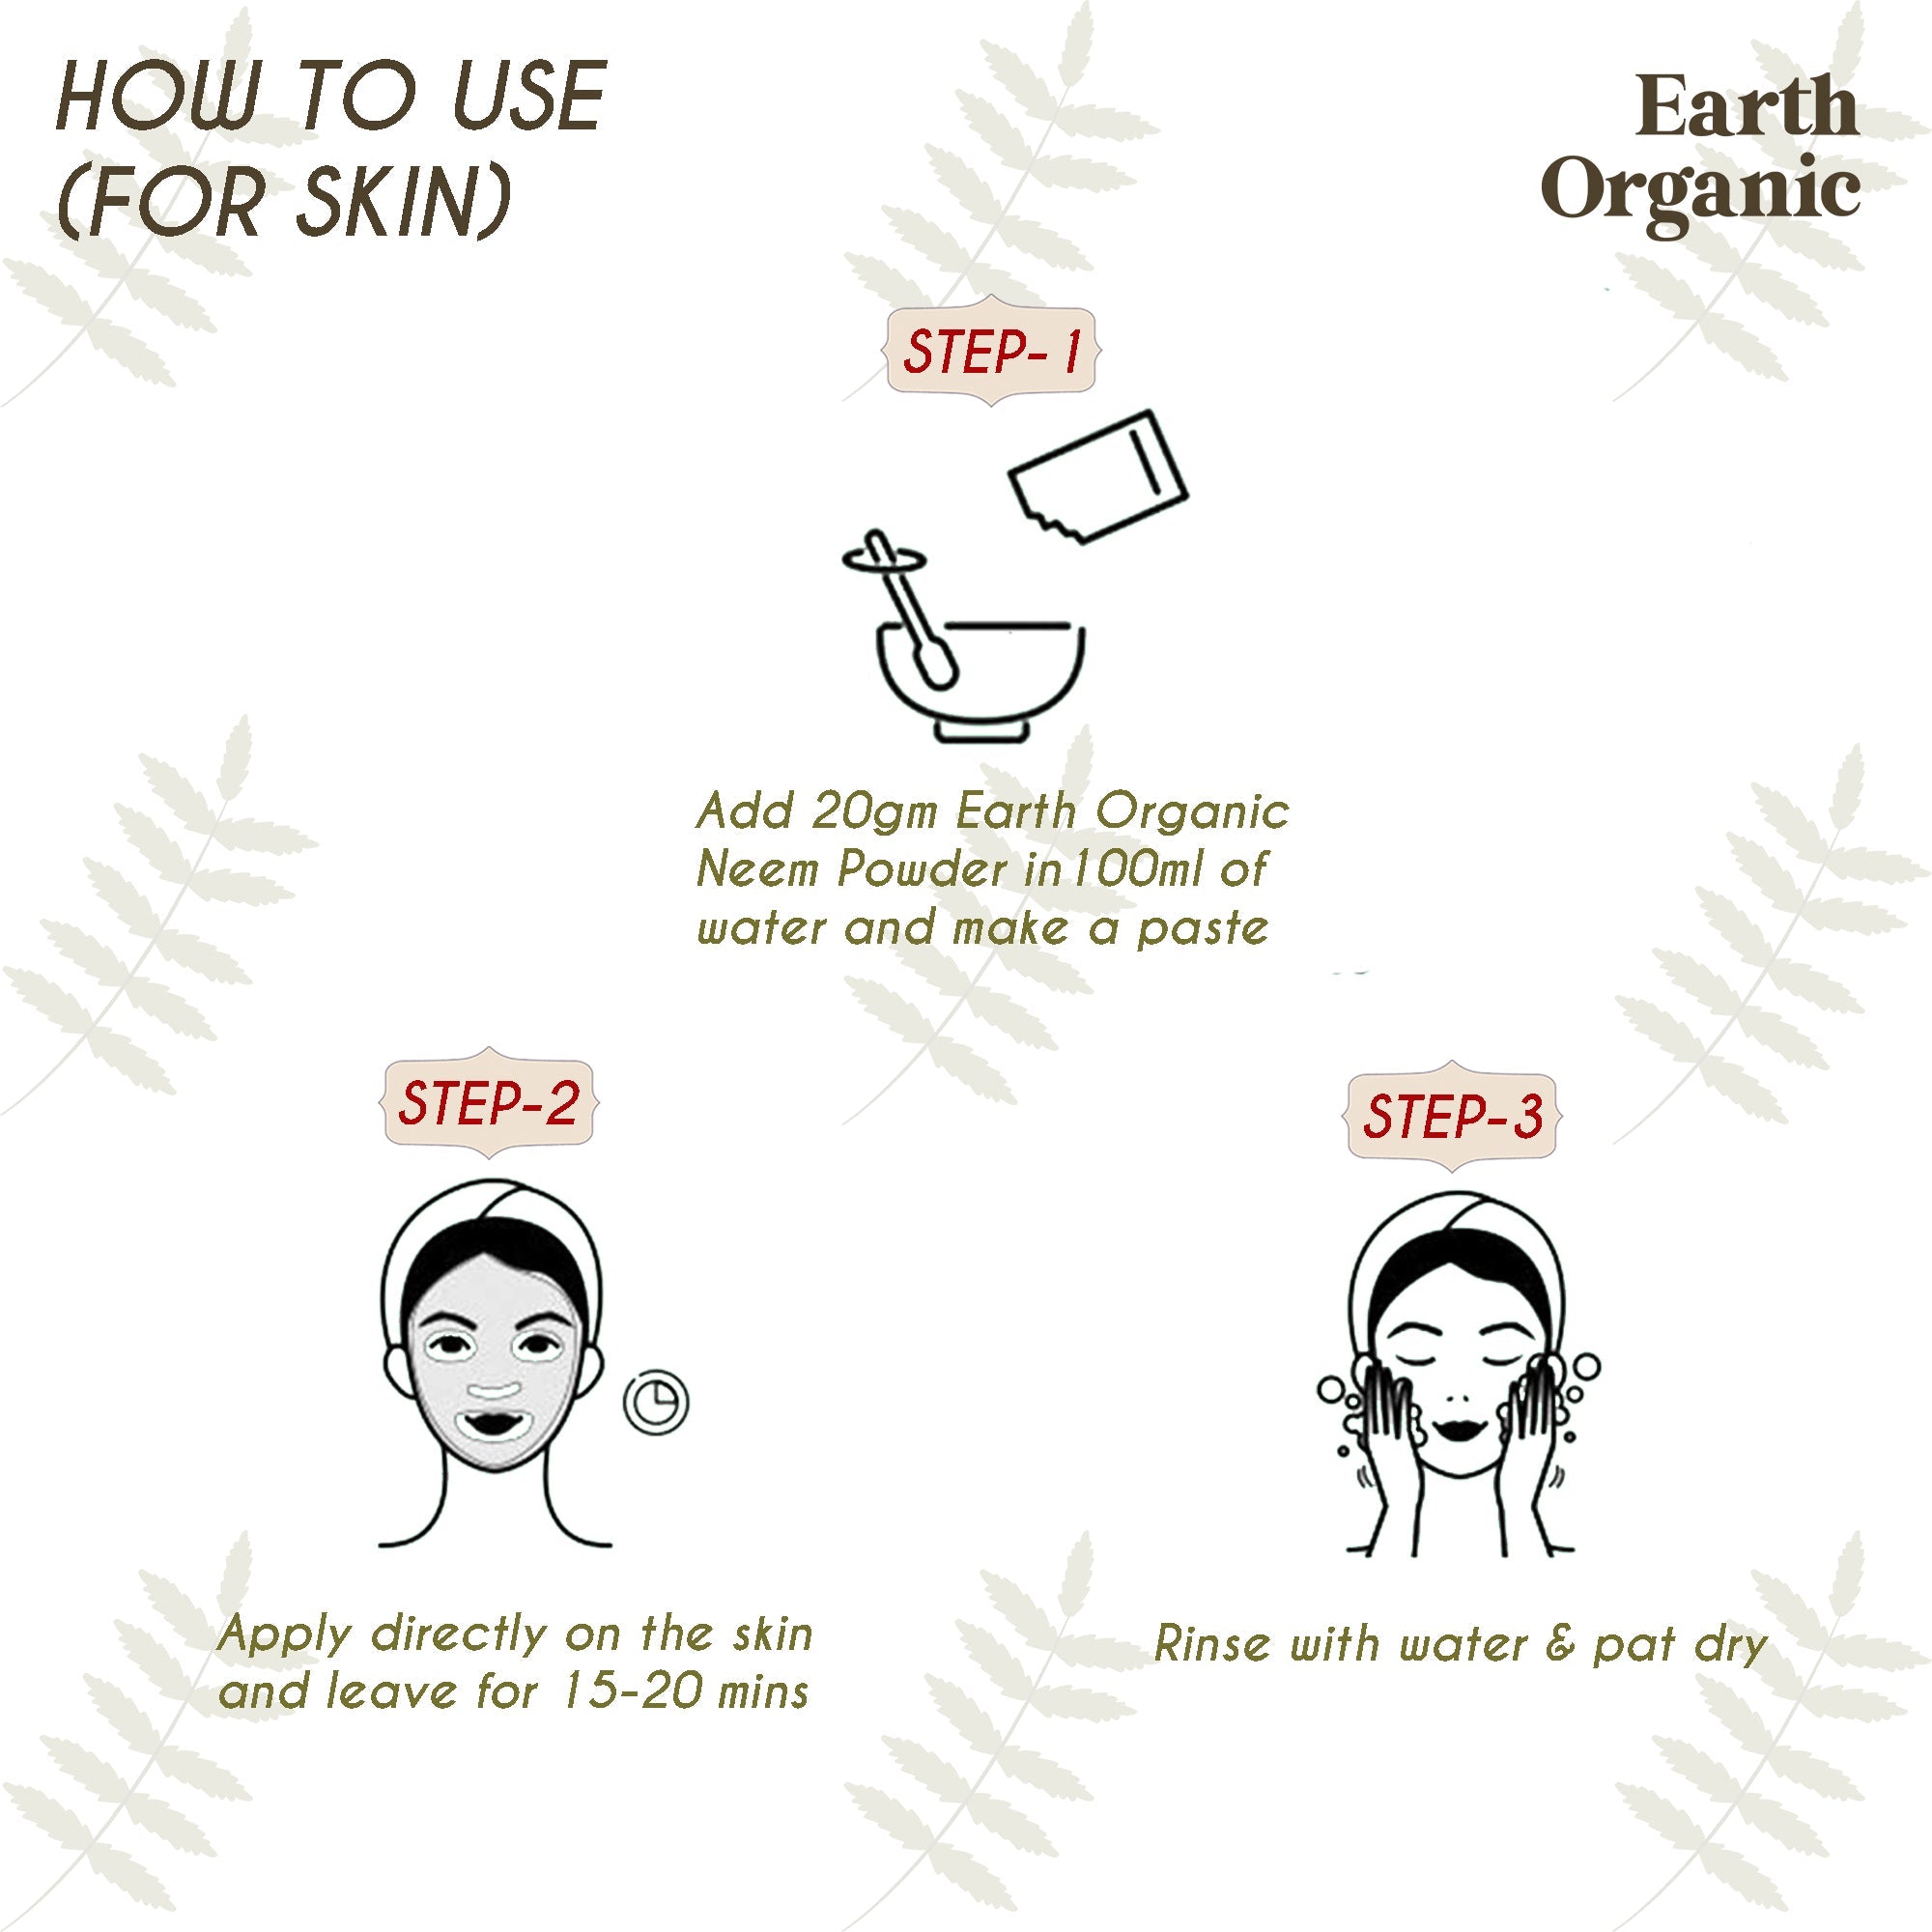 Beneficial for Face, Skin, Hair - The Earth Organic